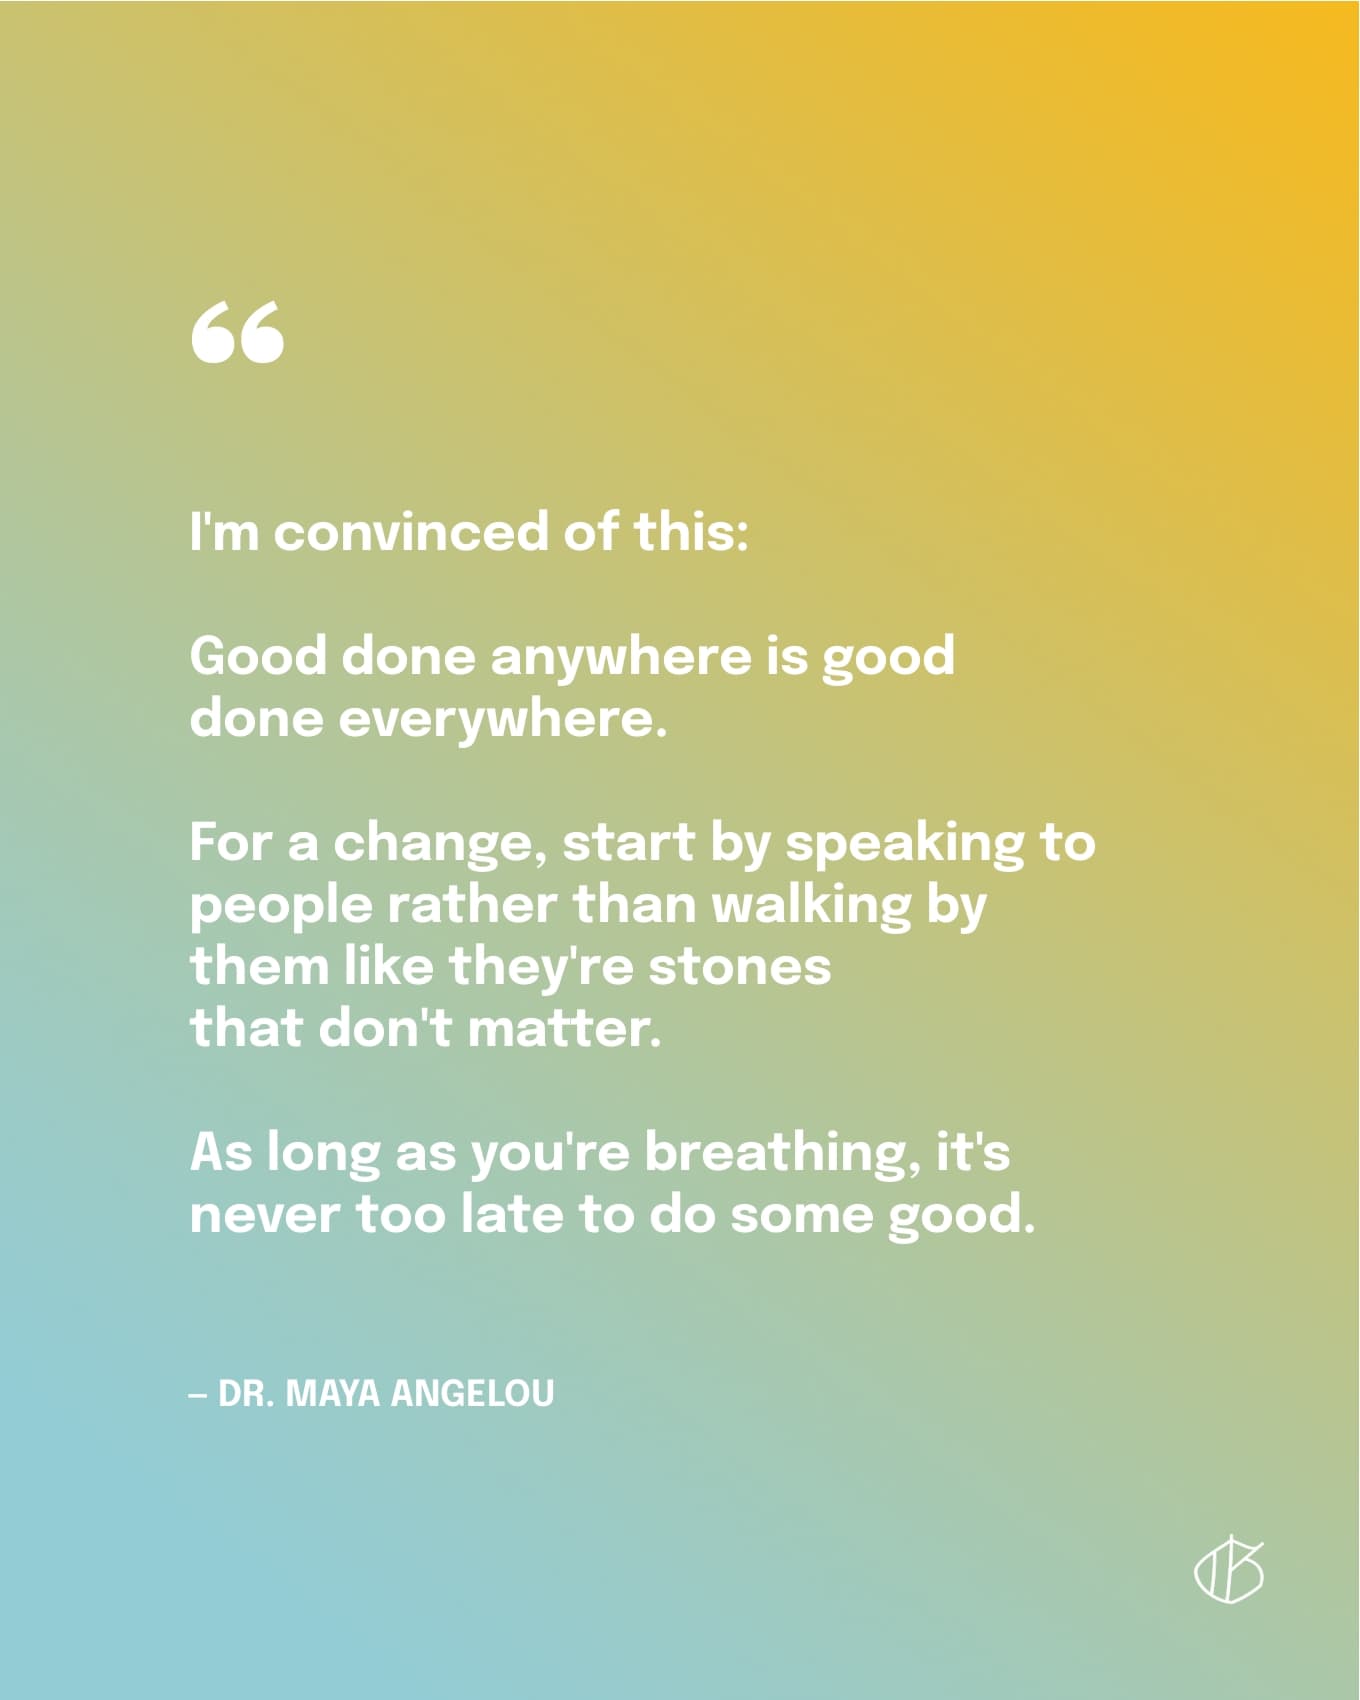 “I'm convinced of this: Good done anywhere is good done everywhere. For a change, start by speaking to people rather than walking by them like they're stones that don't matter. As long as you're breathing, it's never too late to do some good.” — Dr. Maya Angelou